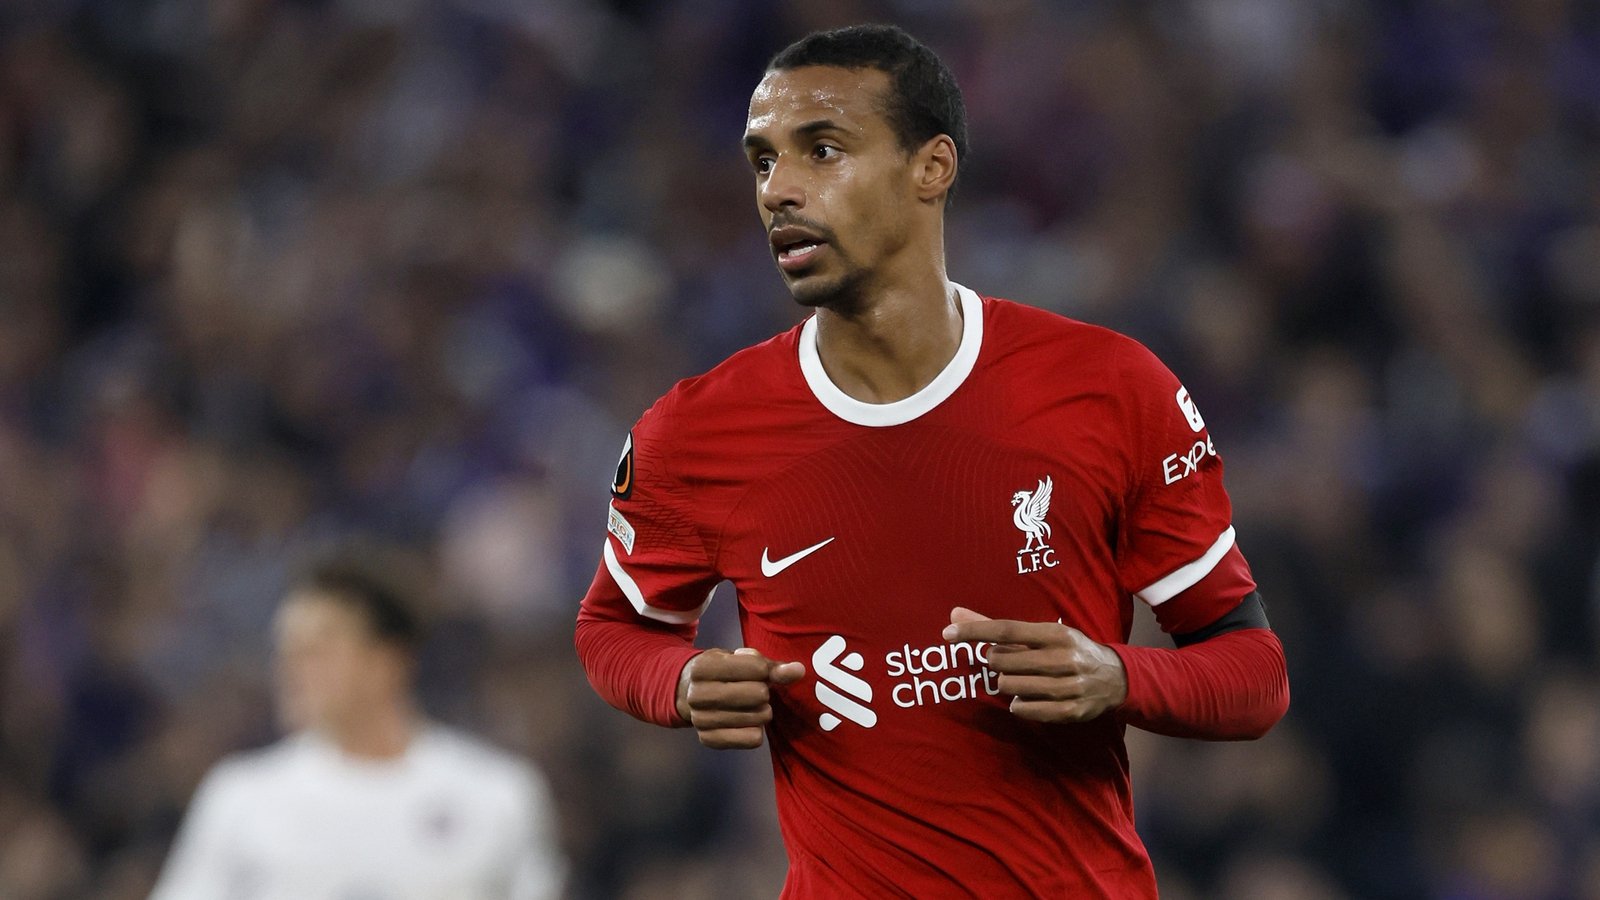 Matip and Thiago set to leave Liverpool this summer